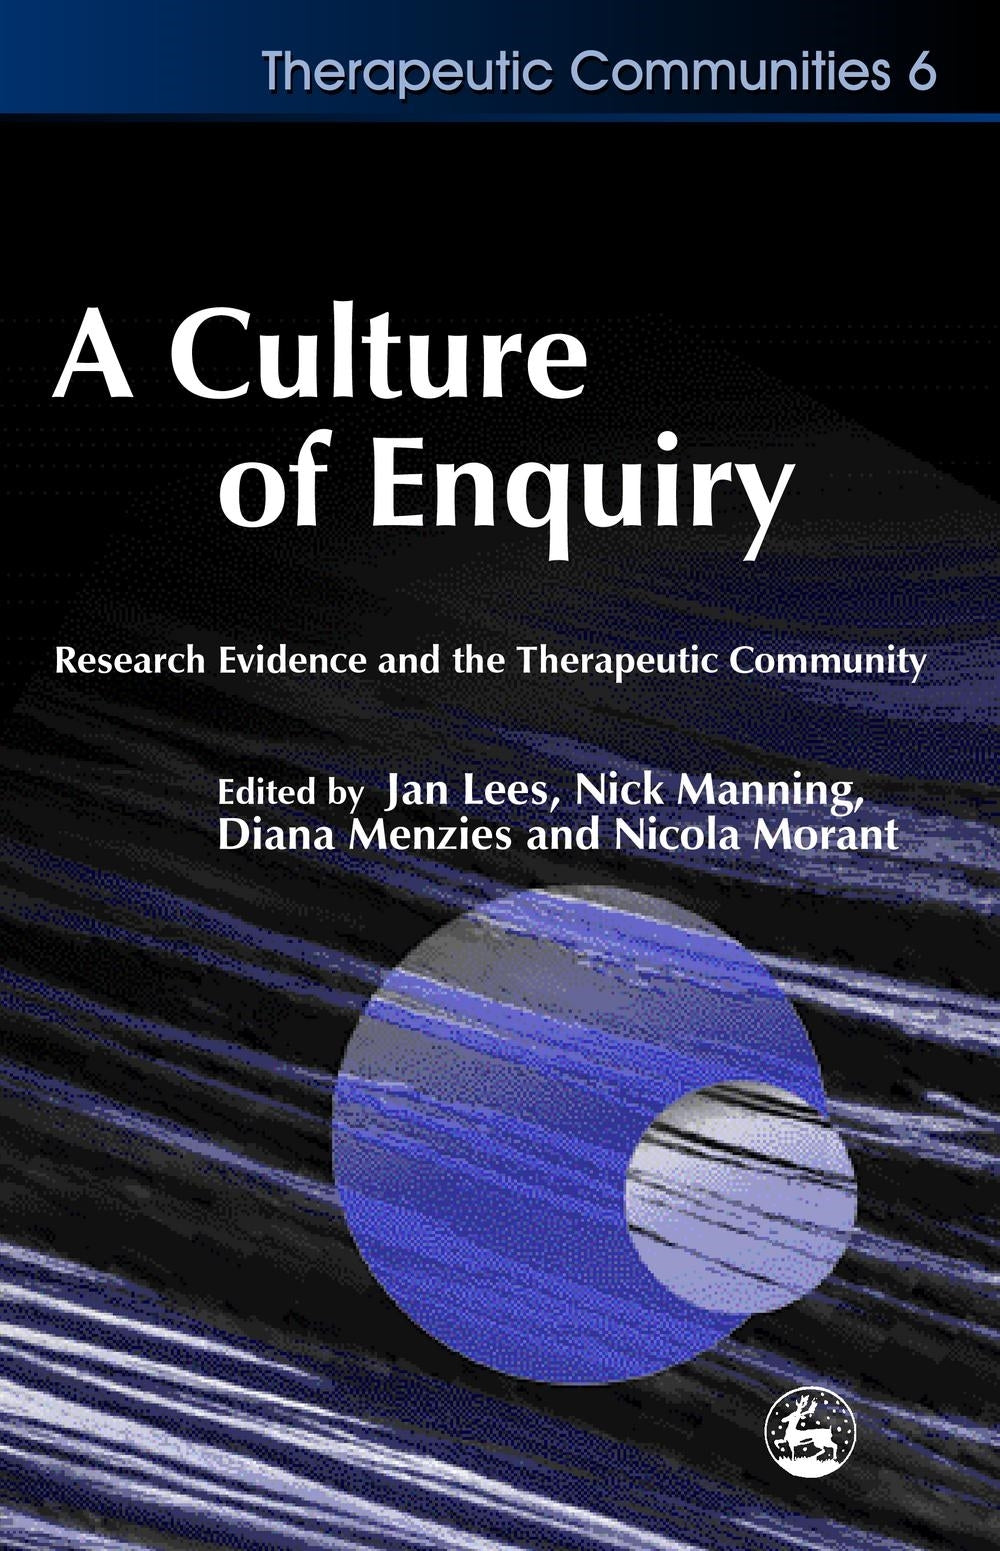 A Culture of Enquiry by Jan Lees, Nick Manning, Diana Menzies